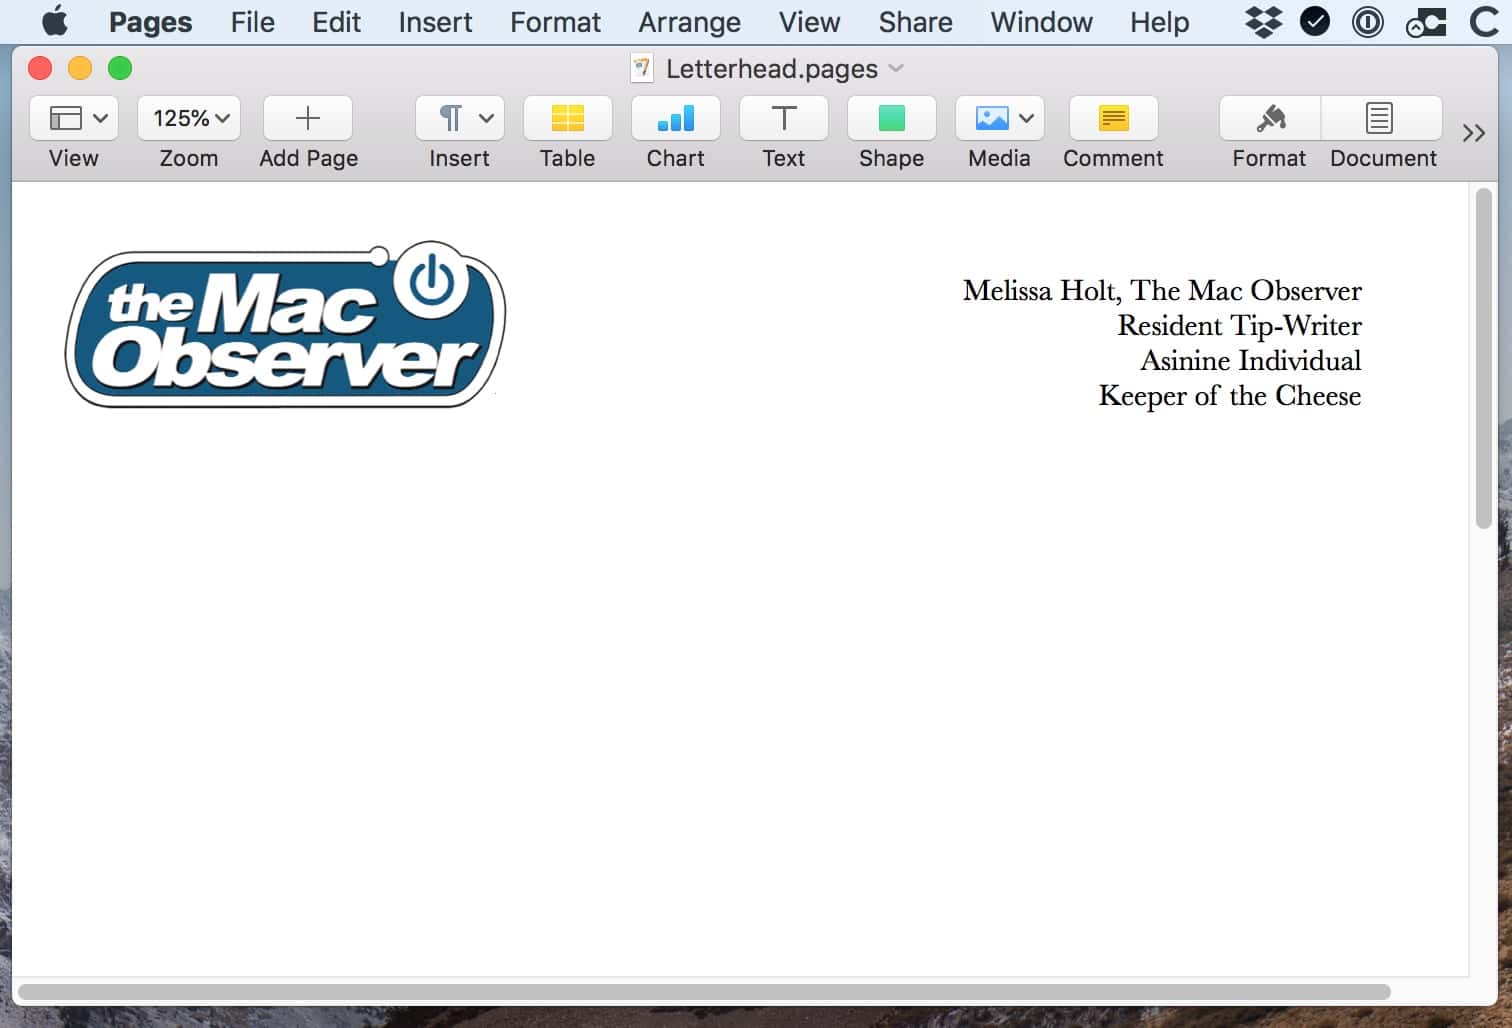 Letterhead document in Pages on the Mac